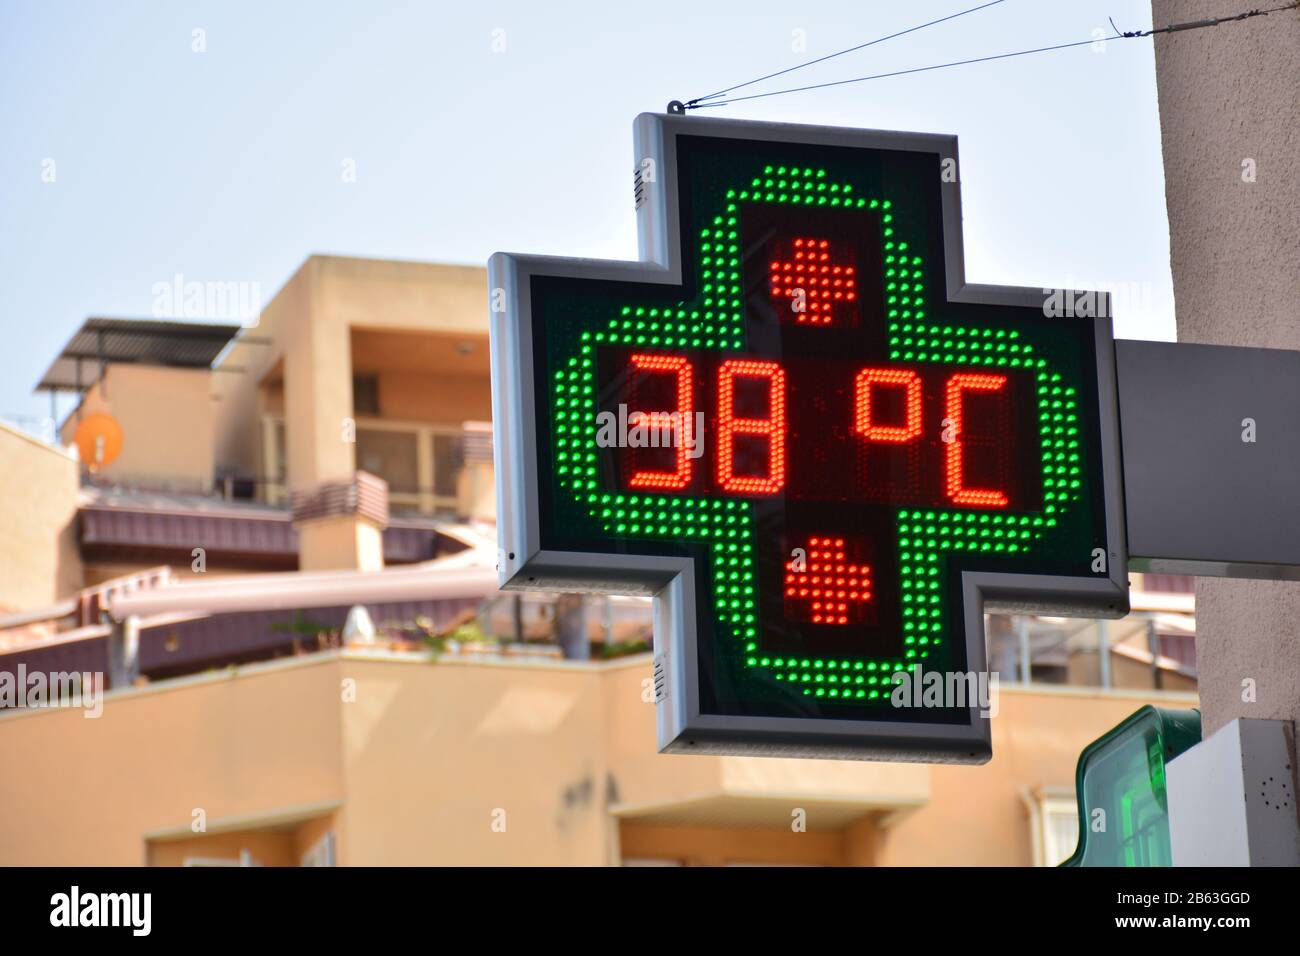 street thermometer of a pharmacy at 38 degrees celsius Stock Photo